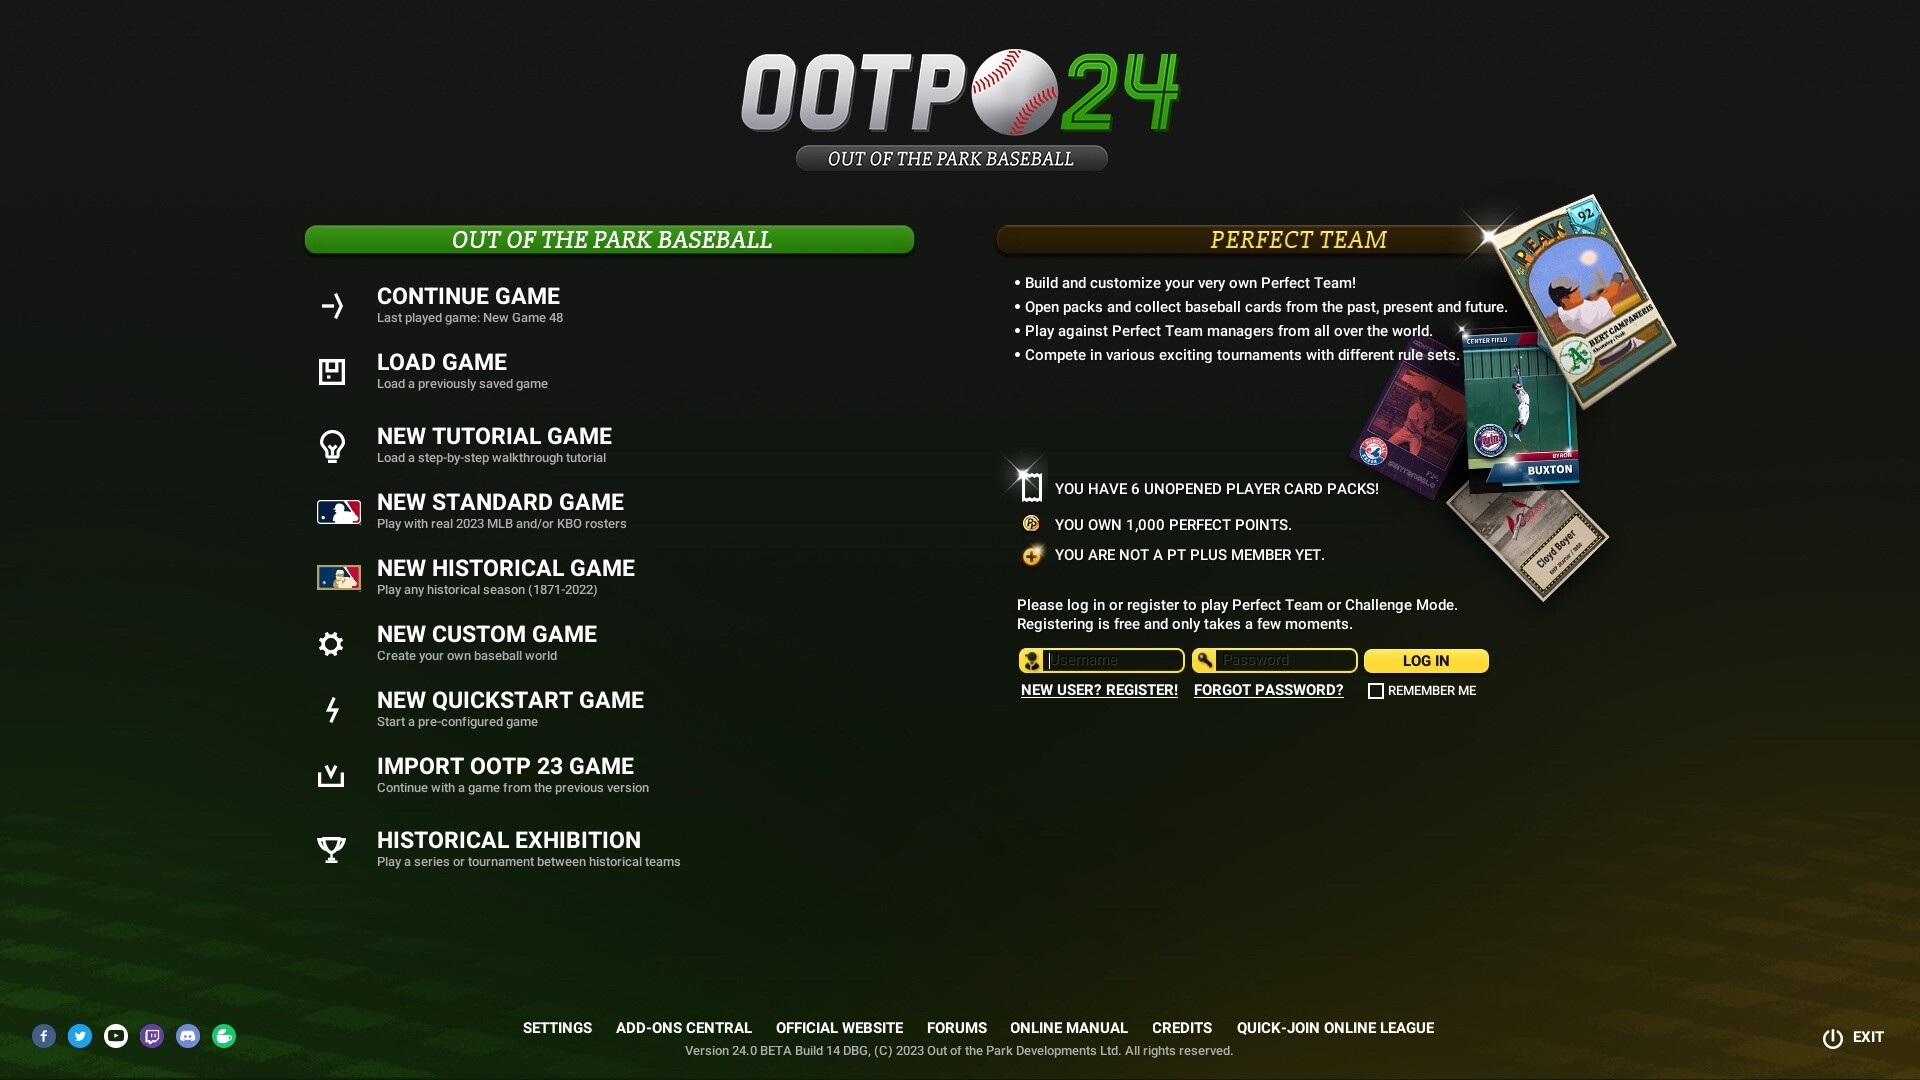 (197.49$) Out of the Park Baseball 24 Steam CD Key